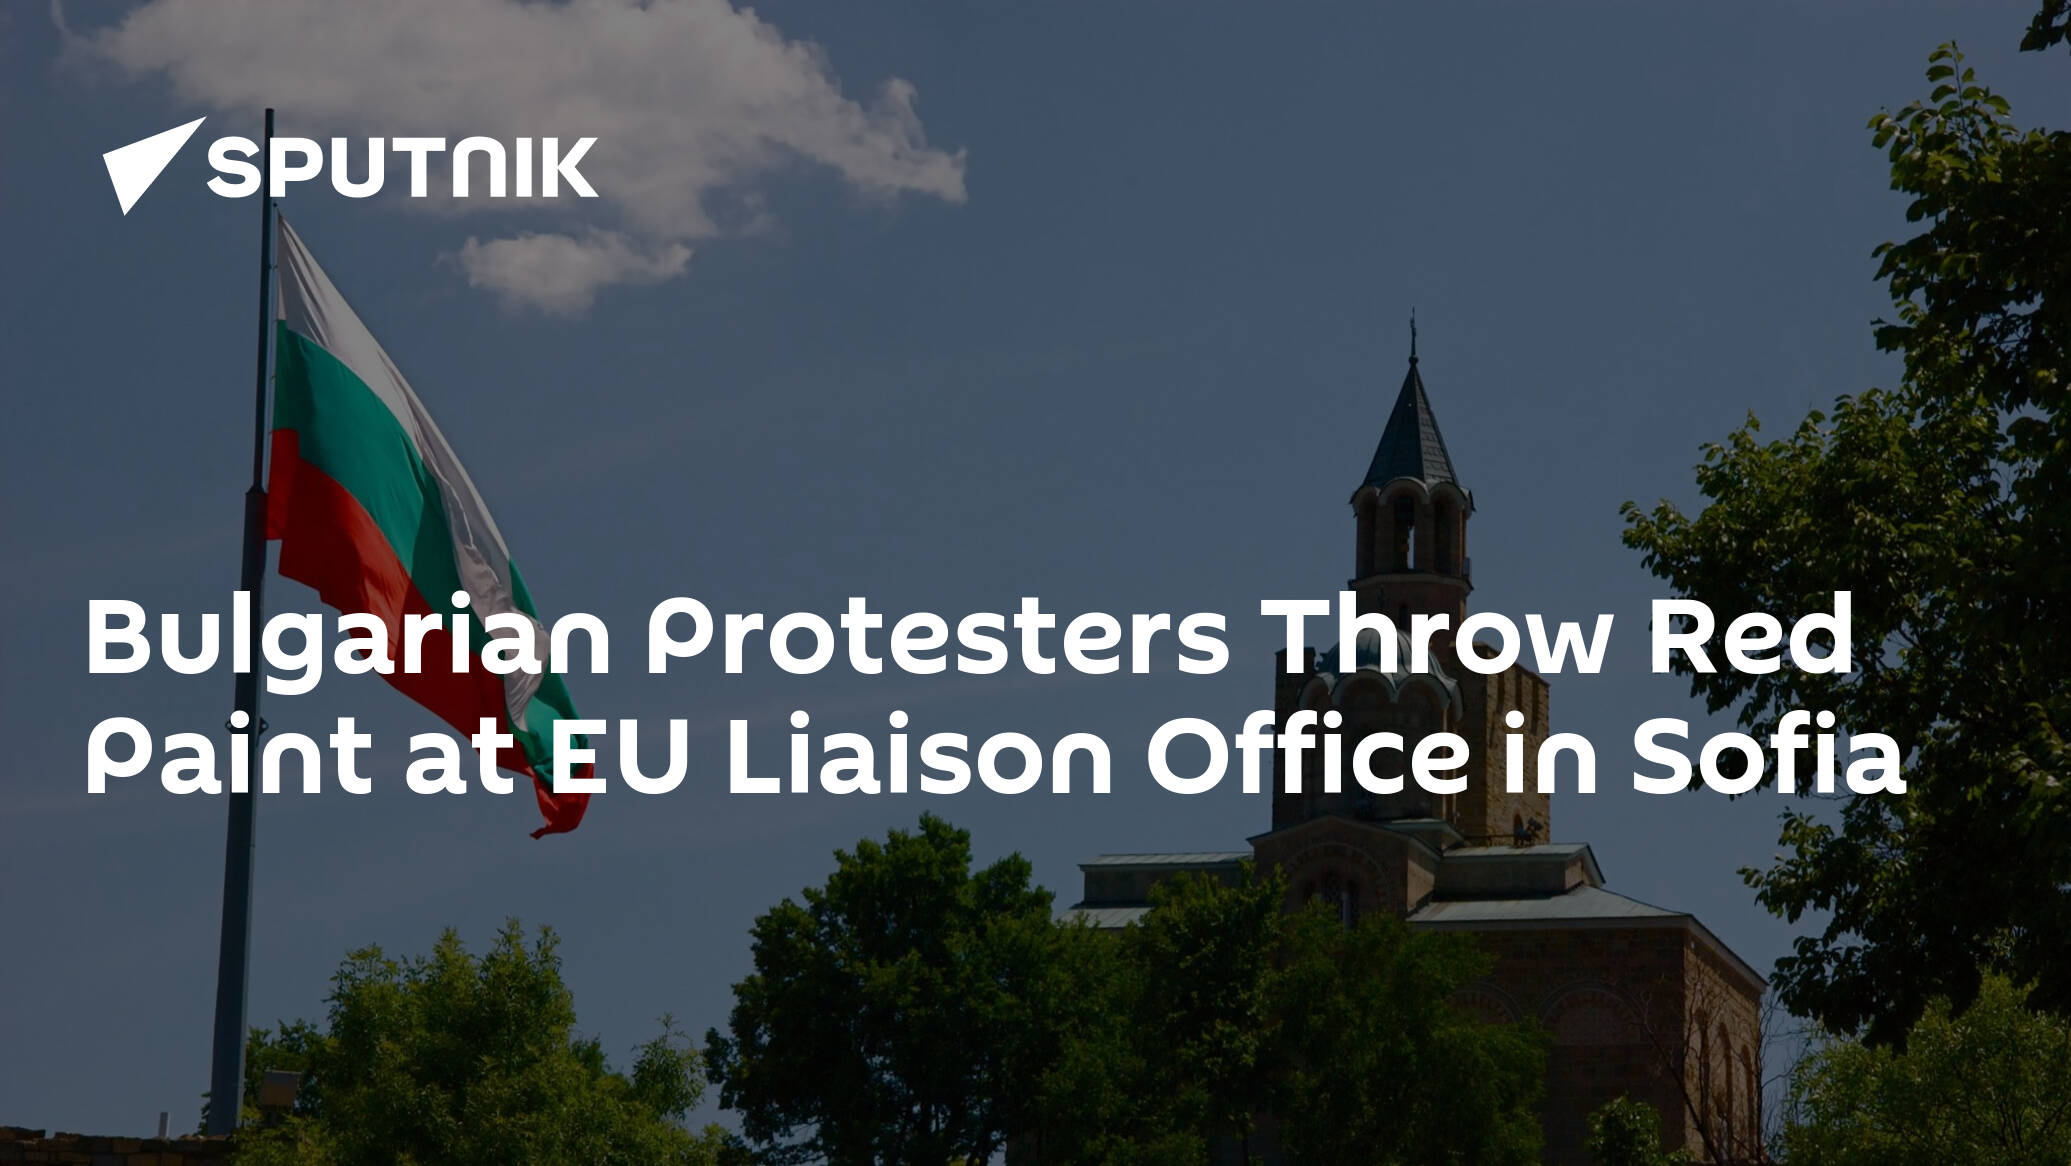 Bulgarian Protesters Throw Red Paint at EU Liaison Office in Sofia